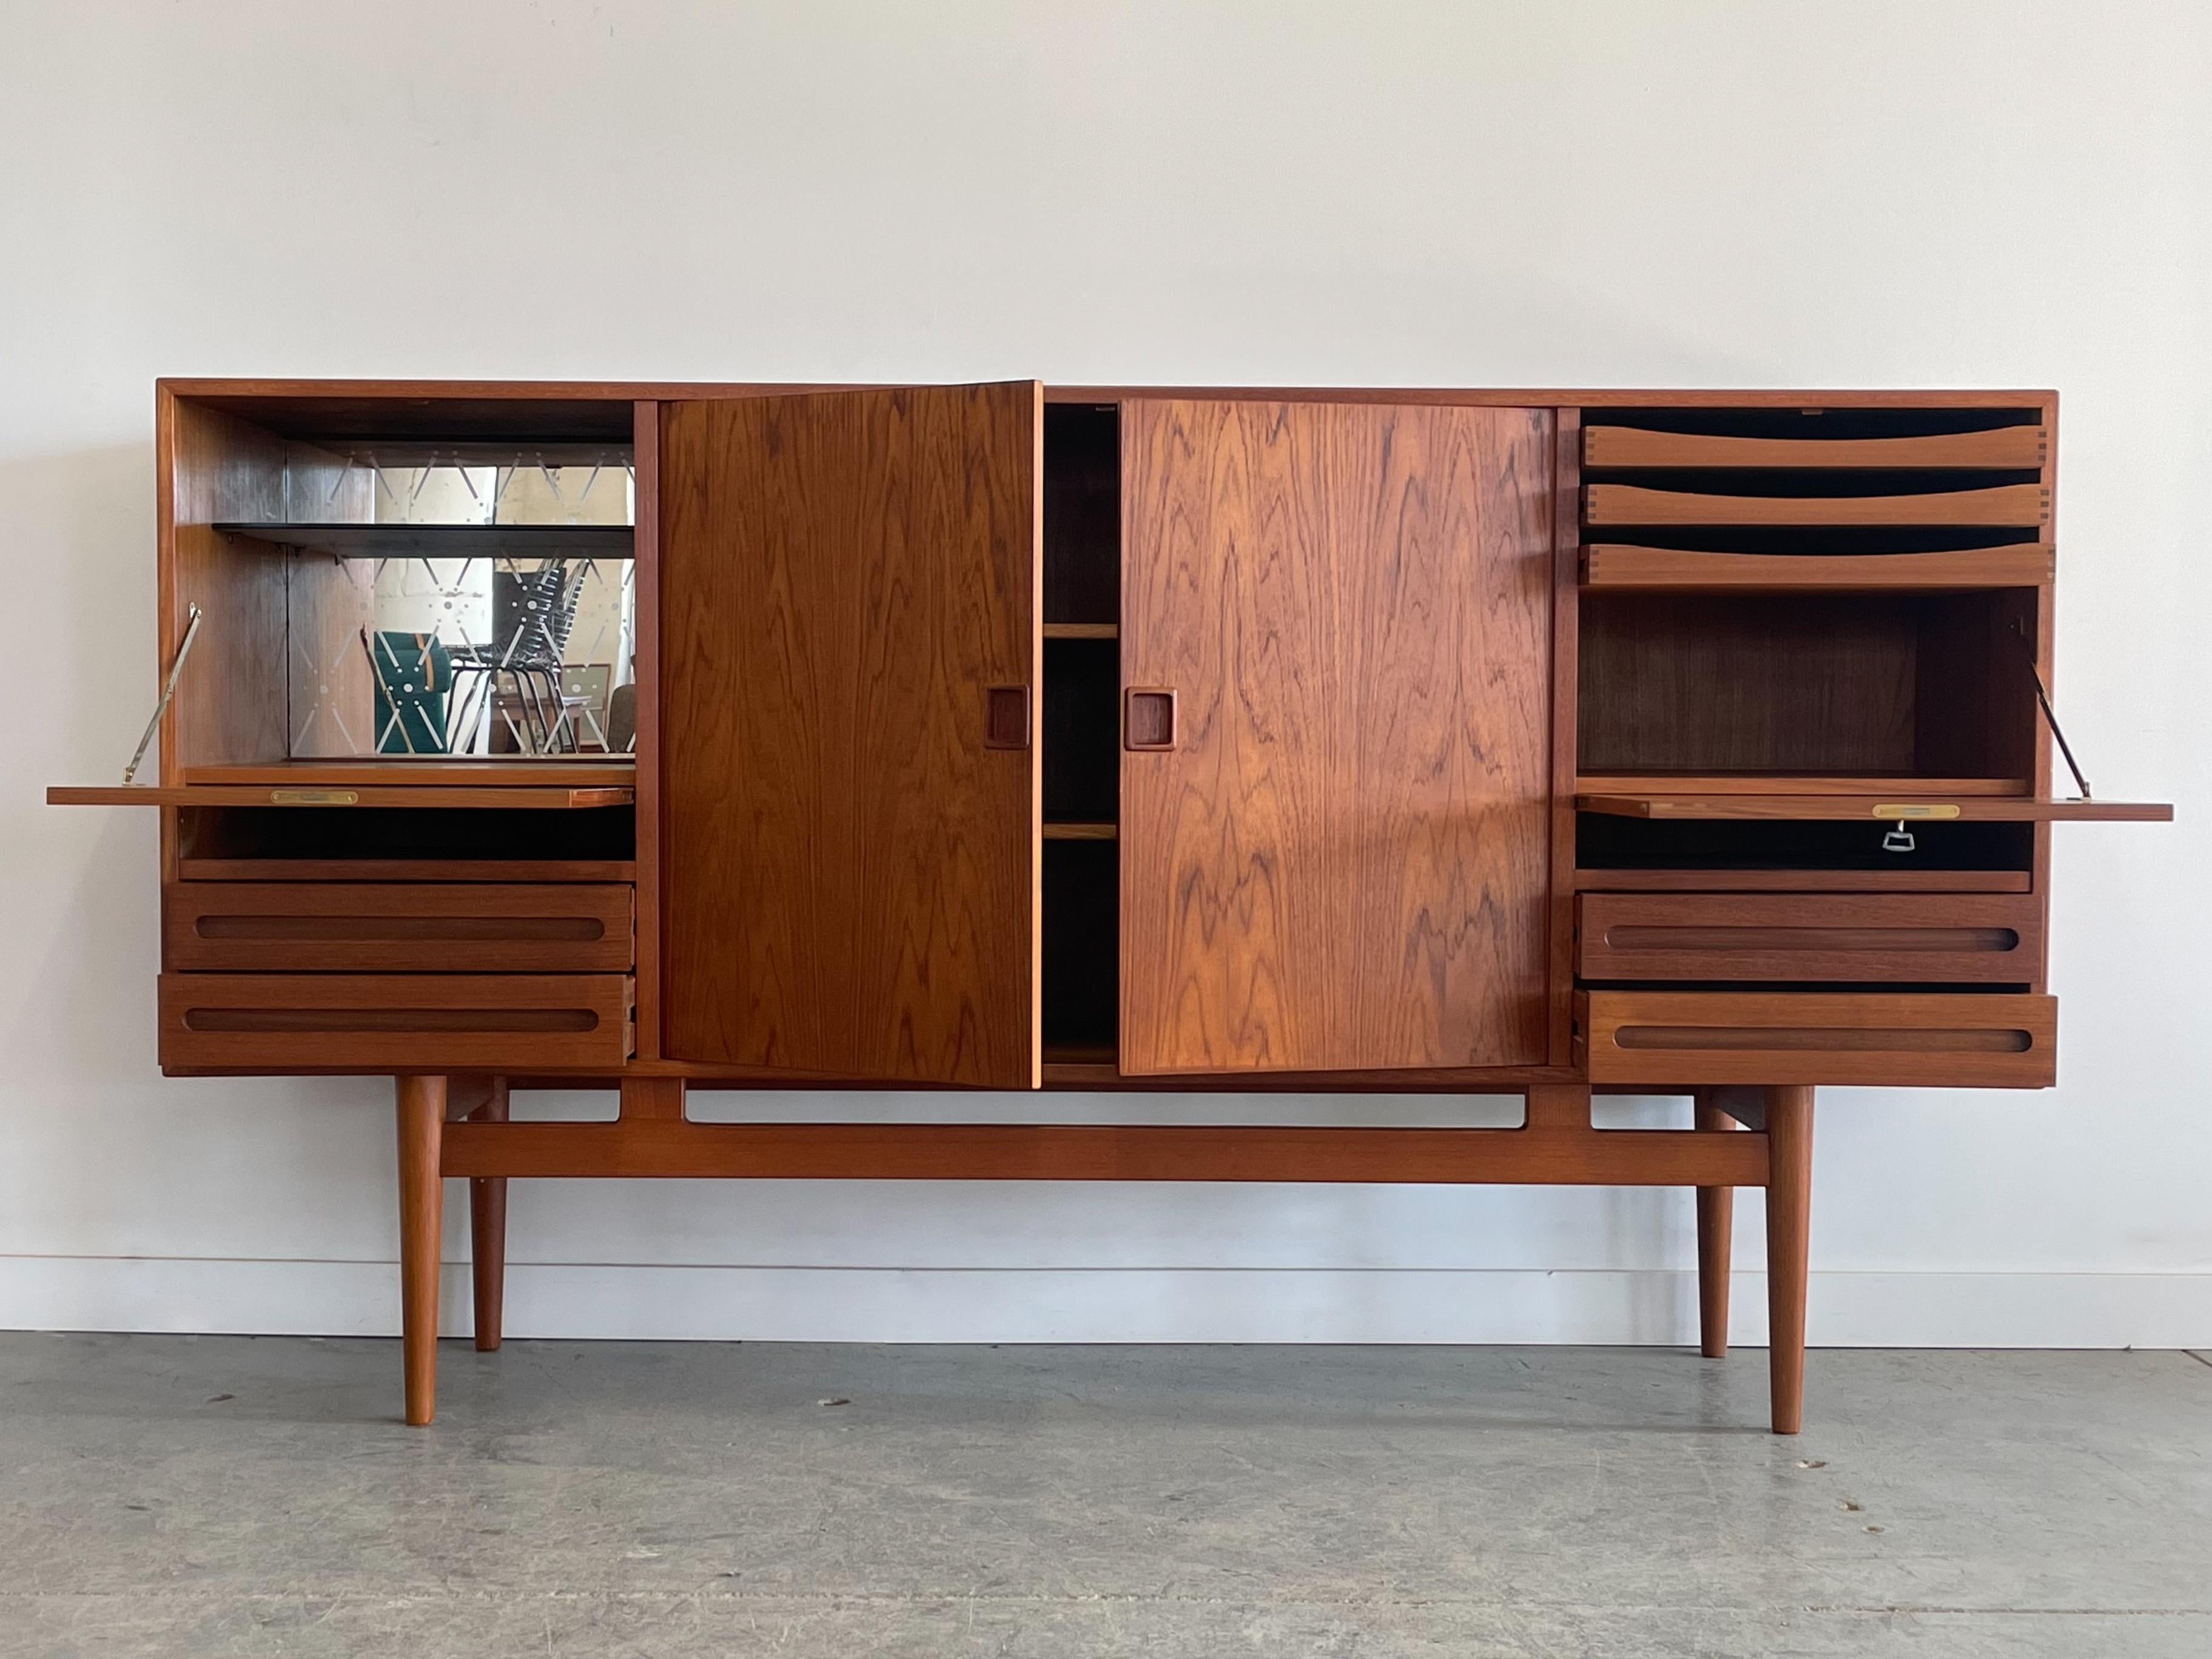 Incredible Danish teak highboard designed by Ejvind Johansson. This piece features solid construction with a rich book-matched grain pattern. It offers a variety of storage options, including internal and external drawers, adjustable shelving, and